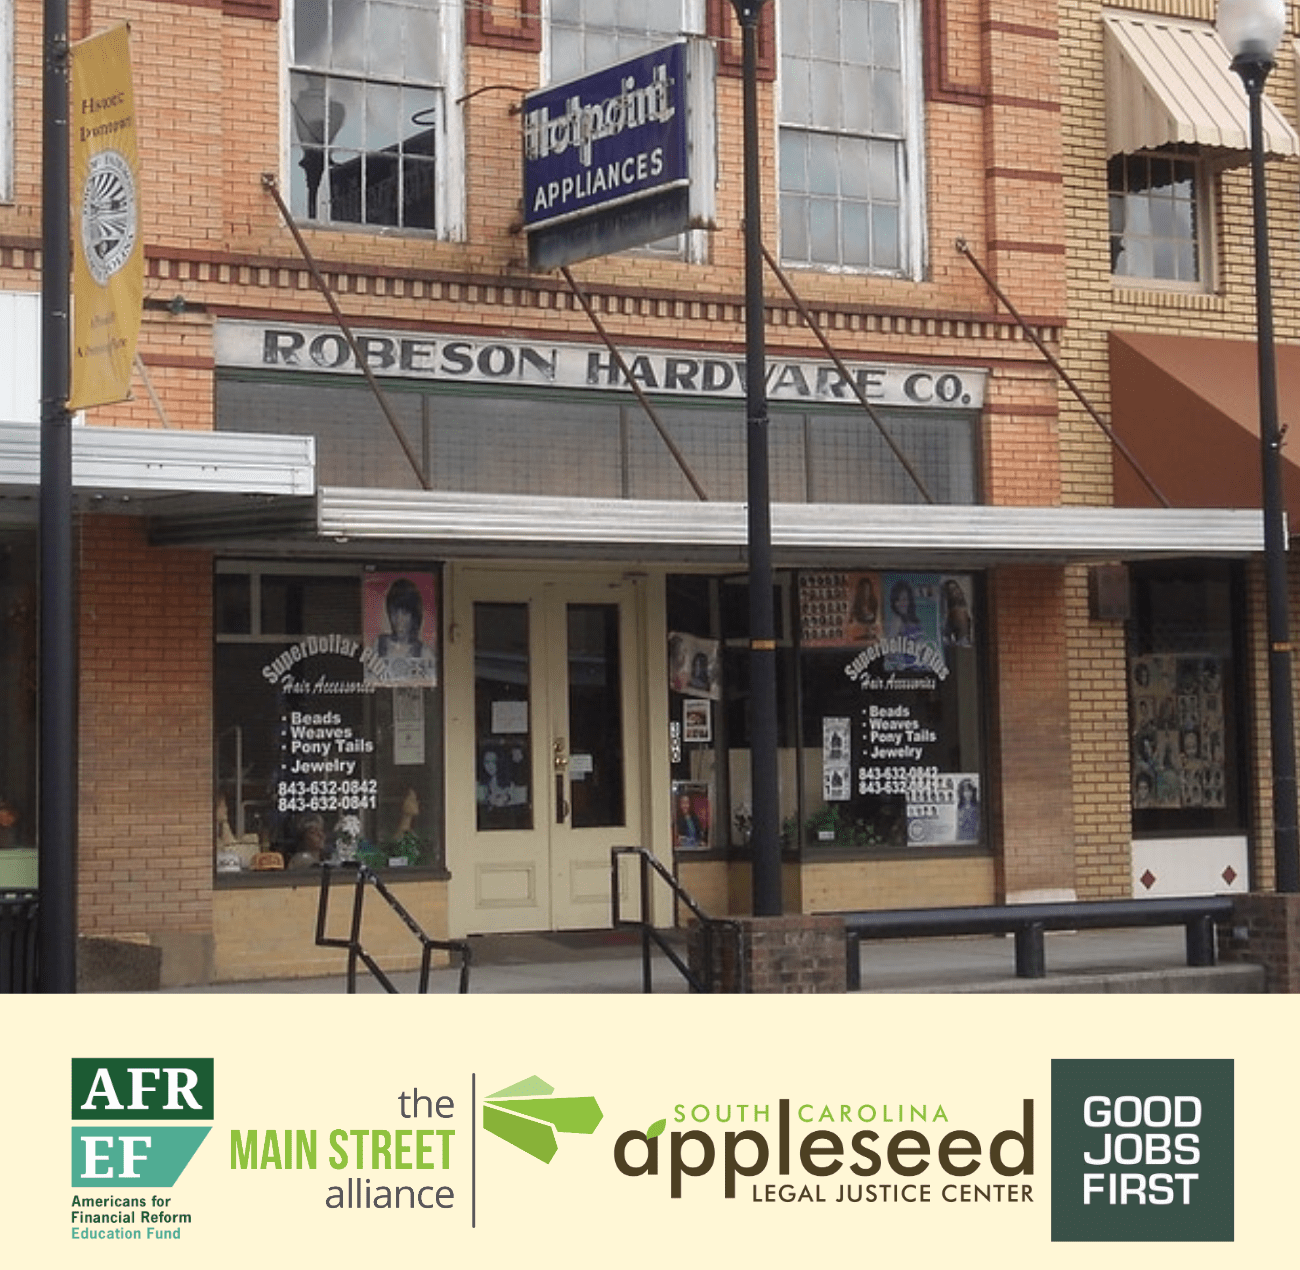 Image of the outside of a small brick shop called "Robeson Hardware" Co. and the oganization names, Americans for Financial Reform Education Fund, Main Street Alliance, South Carolina Appleseed Legal Justice Center and Good Jobs First.